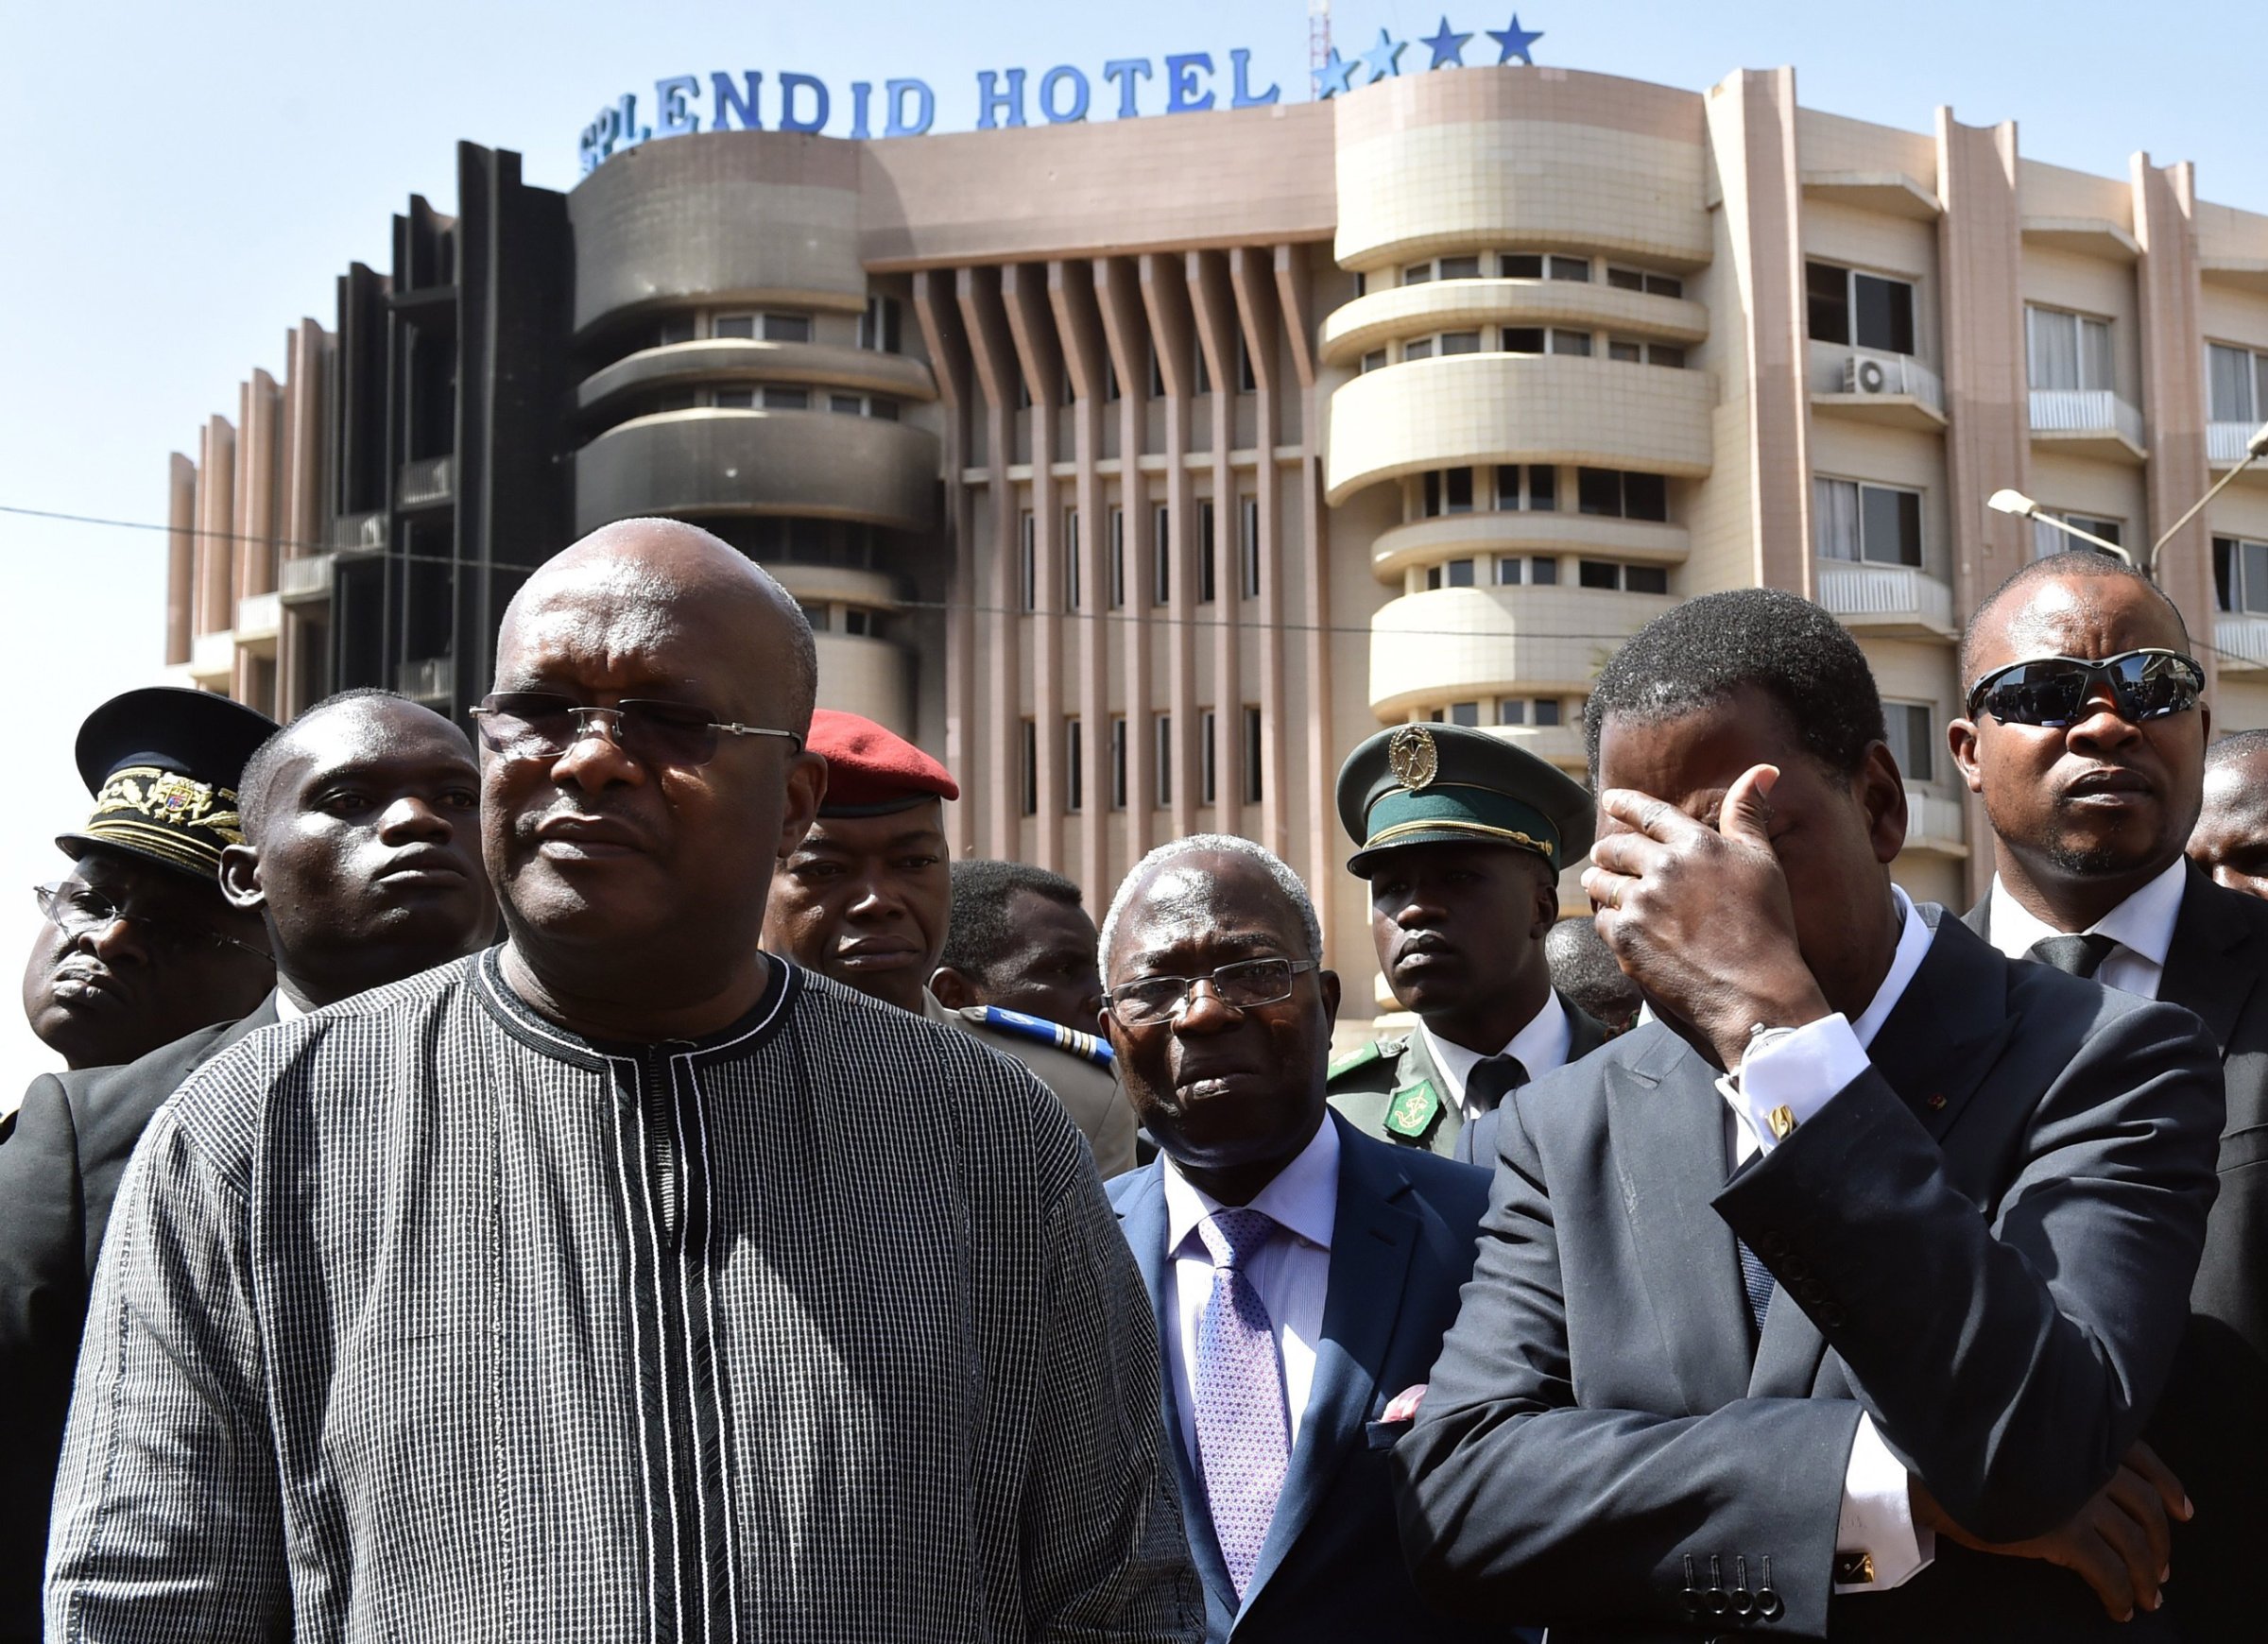 Burkina Faso's President Roch Marc Christian Kabore (L) and Benin's President Thomas Boni Yayi (R) visit the Splendid hotel and the Capuccino cafe on January 18, 2016 in Ouagadougou, following a jihadist attack by Al-Qaeda in the Islamic Maghreb (AQIM) late on January 15. West African nations will "fight back" after a Burkina Faso hotel attack that left 29 dead and showed jihadist fighters expanding their reach in the region, Benin President Thomas Boni Yayi said on January 18, 2016. Friday's attack on a four-star hotel, which left at least 29 dead, half of them foreigners, came weeks after an attack on a luxury Mali hotel in Bamako claimed by Islamists that left 20 people dead. / AFP / ISSOUF SANOGOISSOUF SANOGO/AFP/Getty Images